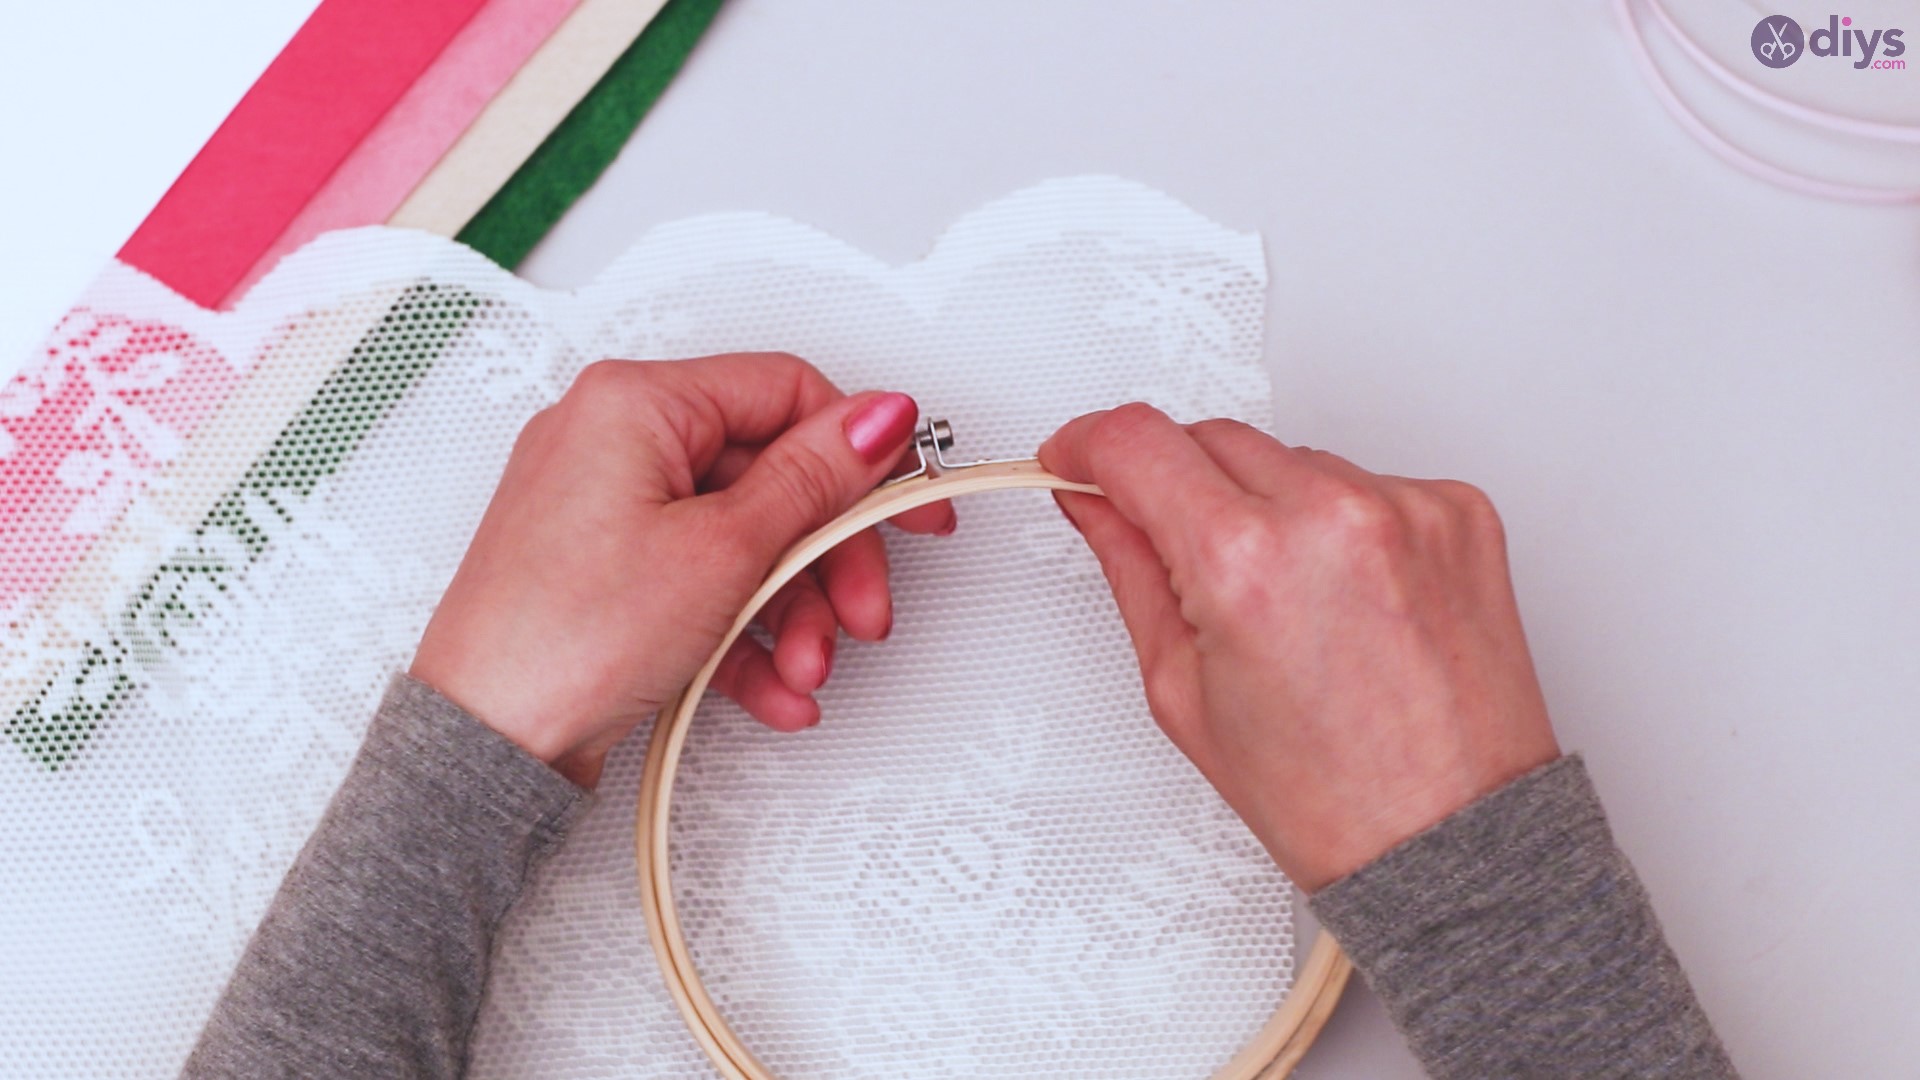 Diy embroidery hoop wall decor tutorial step by step (1)